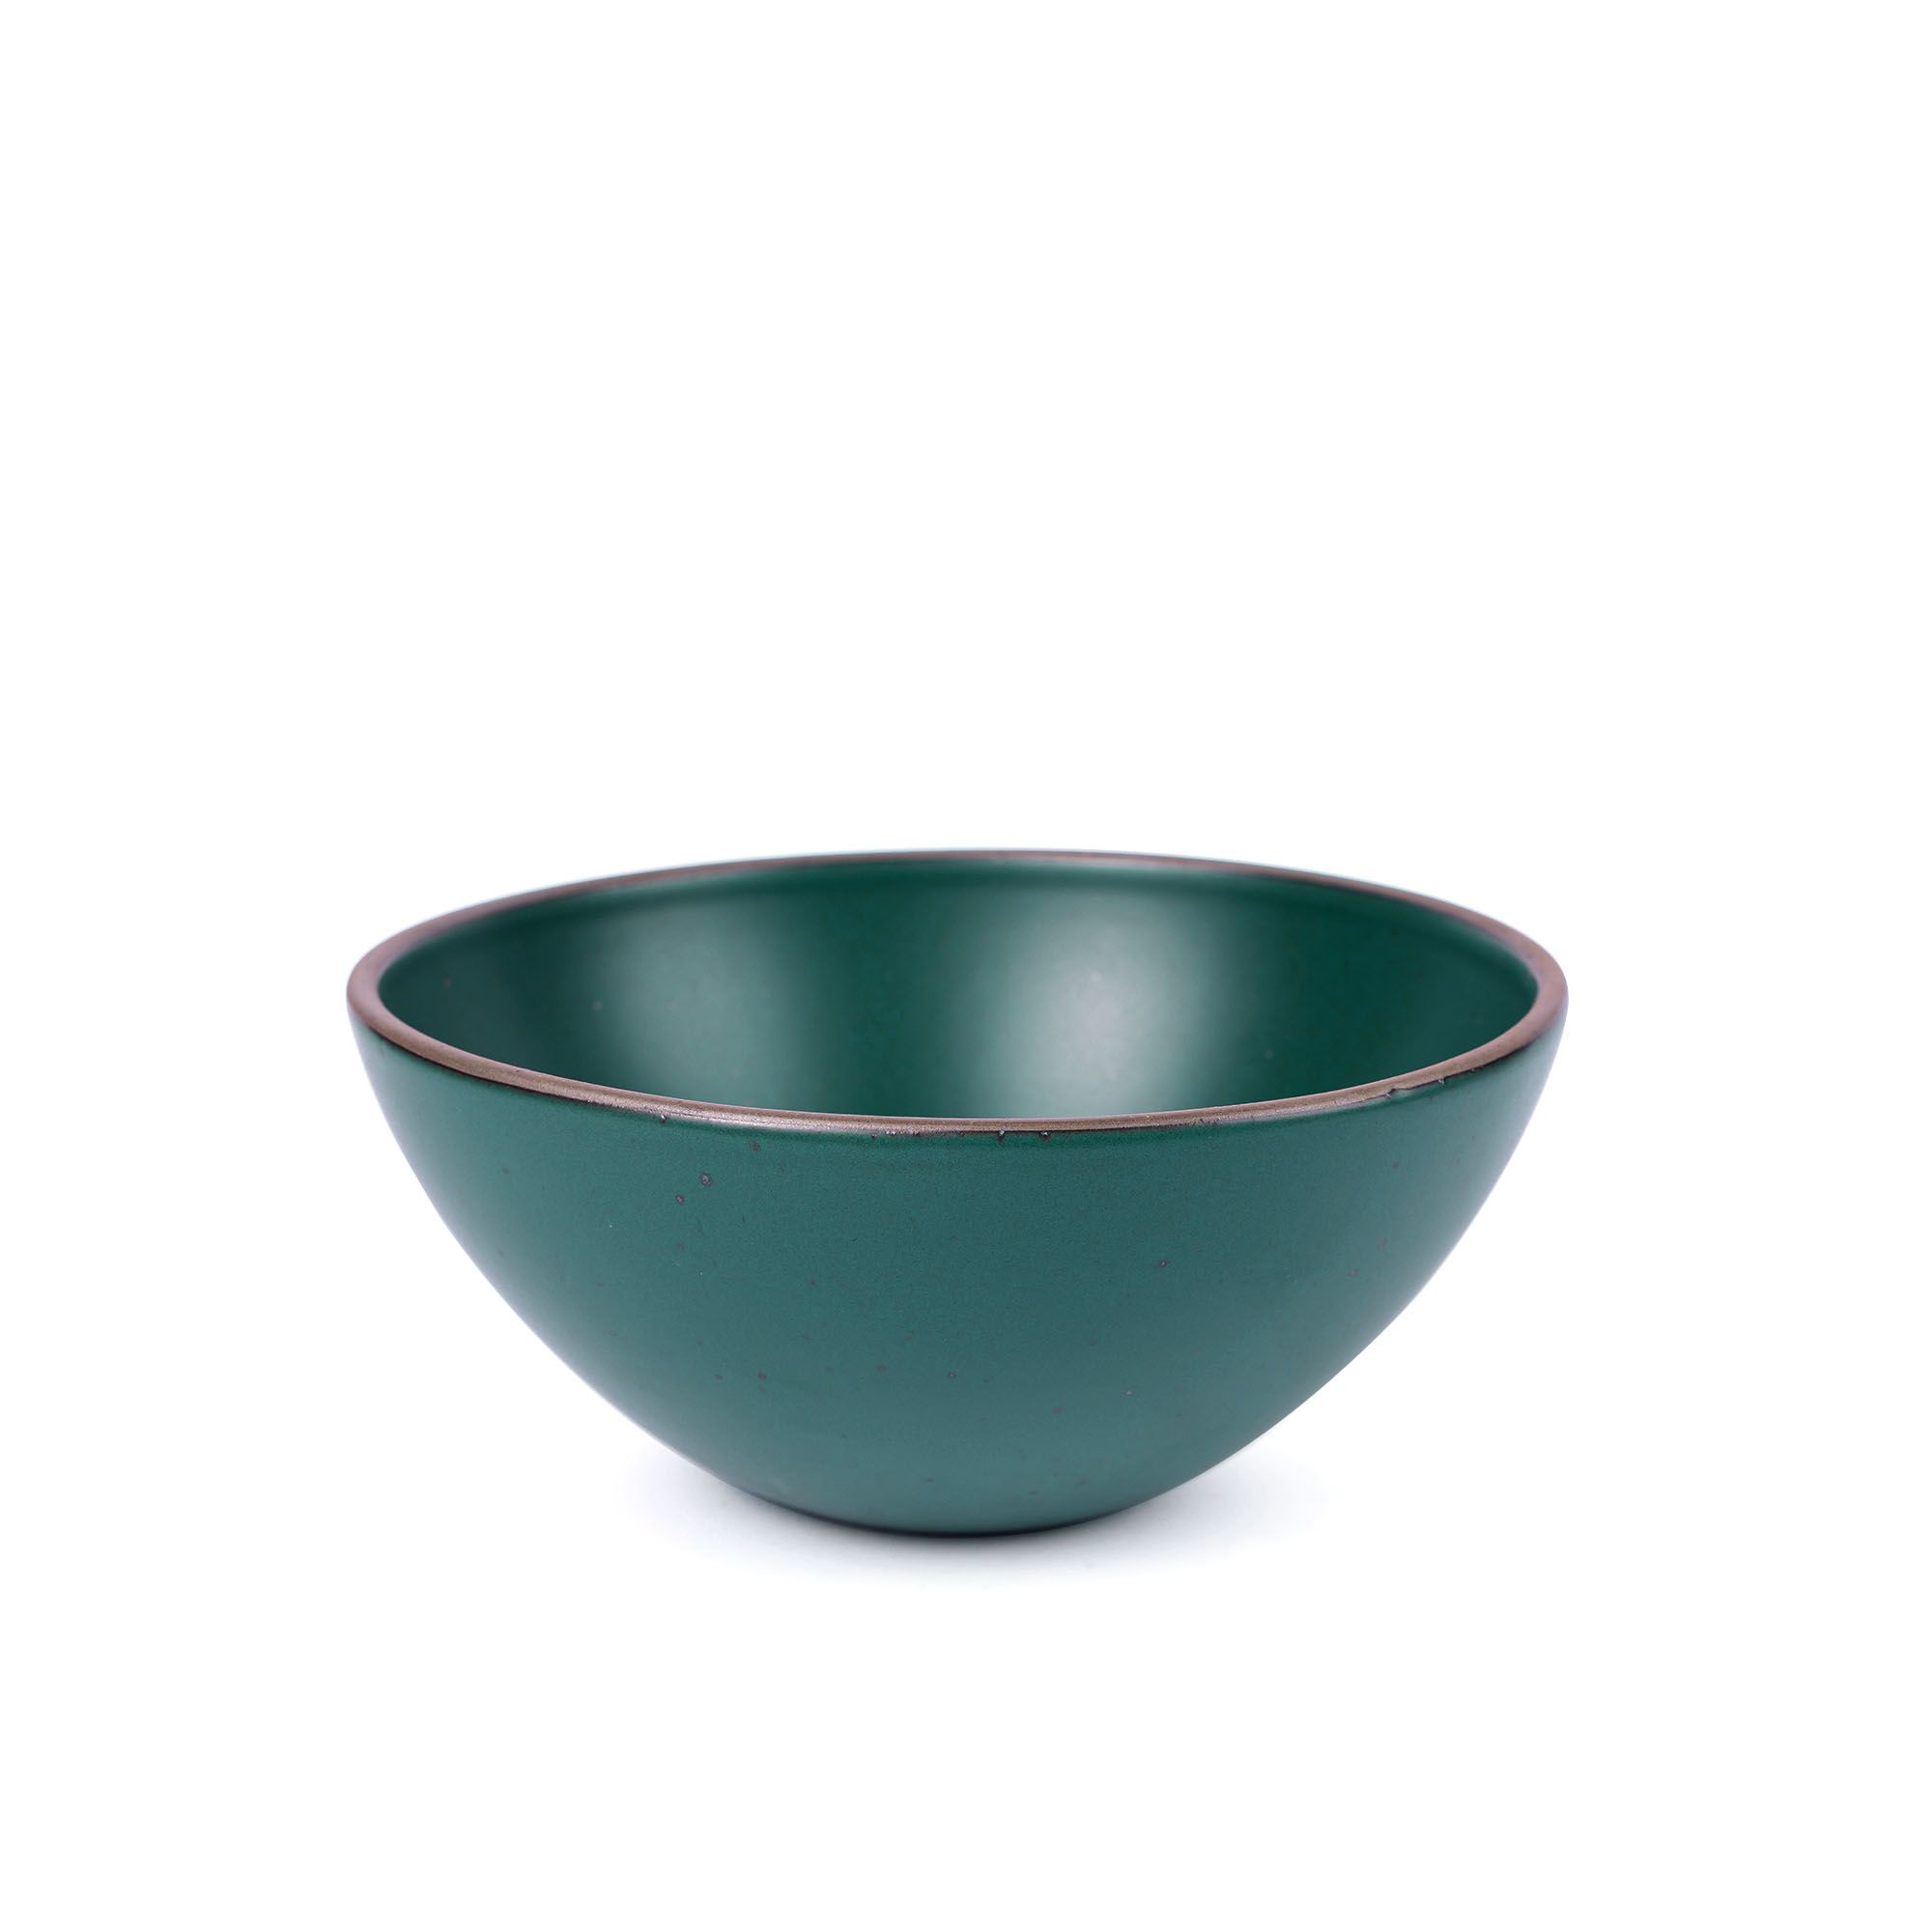 A large rounded ceramic bowl in a deep dark teal color featuring iron speckles and an unglazed rim